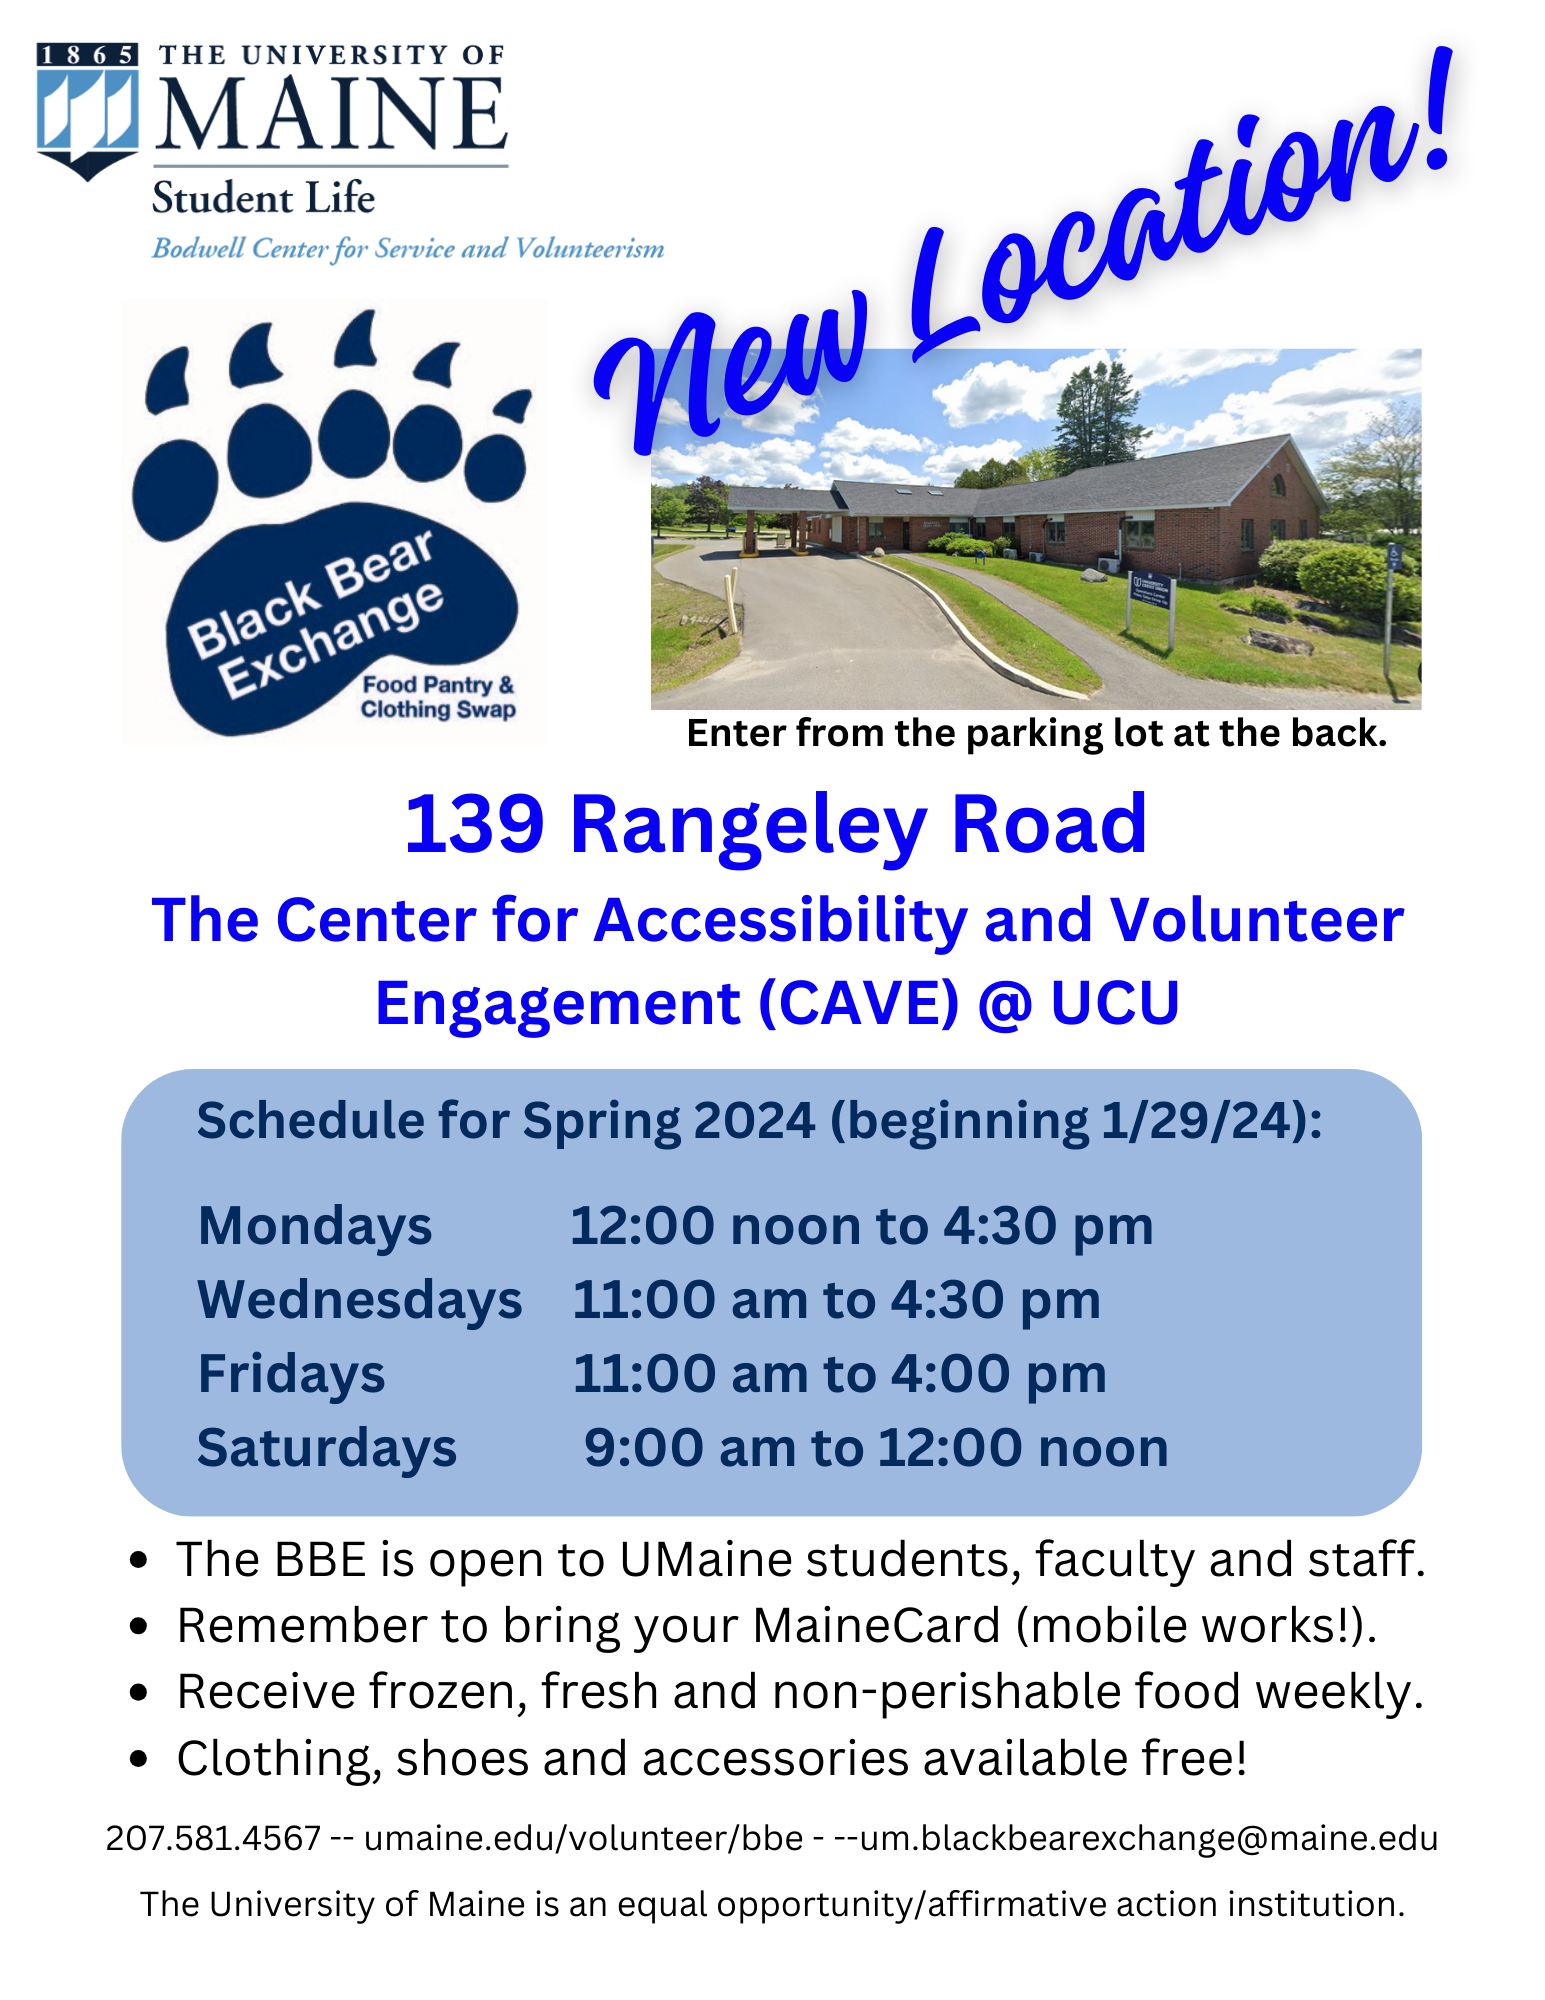 Now located at 139 Rangeley Road on the UMaine campus. Hours for spring 2024 are Mondays 12:00 noon to 4:30 pm, Wednesdays 11:00 am to 4:30 pm, Fridays 11:00 am to 4:00 pm and Saturdays 9:00 am to 12:00 noon.